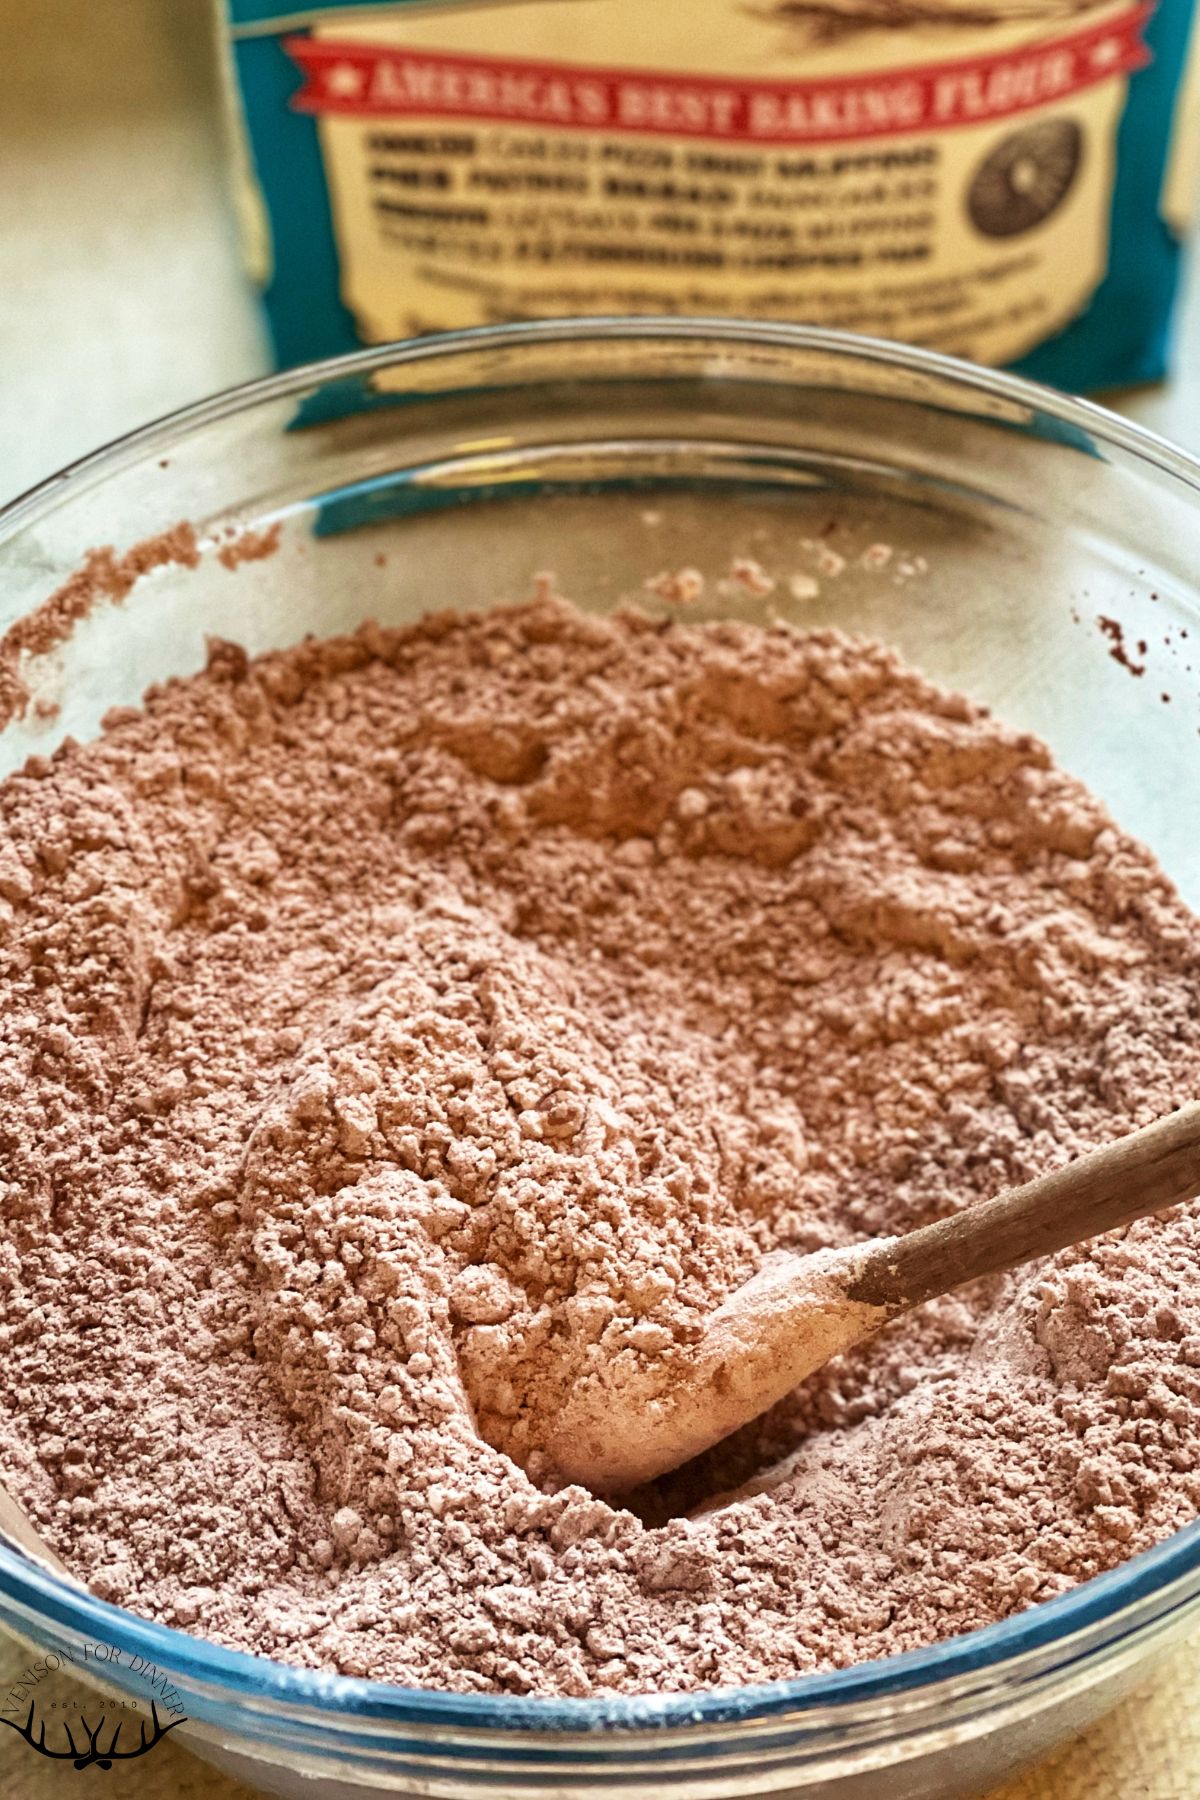 A wooden spoon in a bowl of flour and cocoa powder.